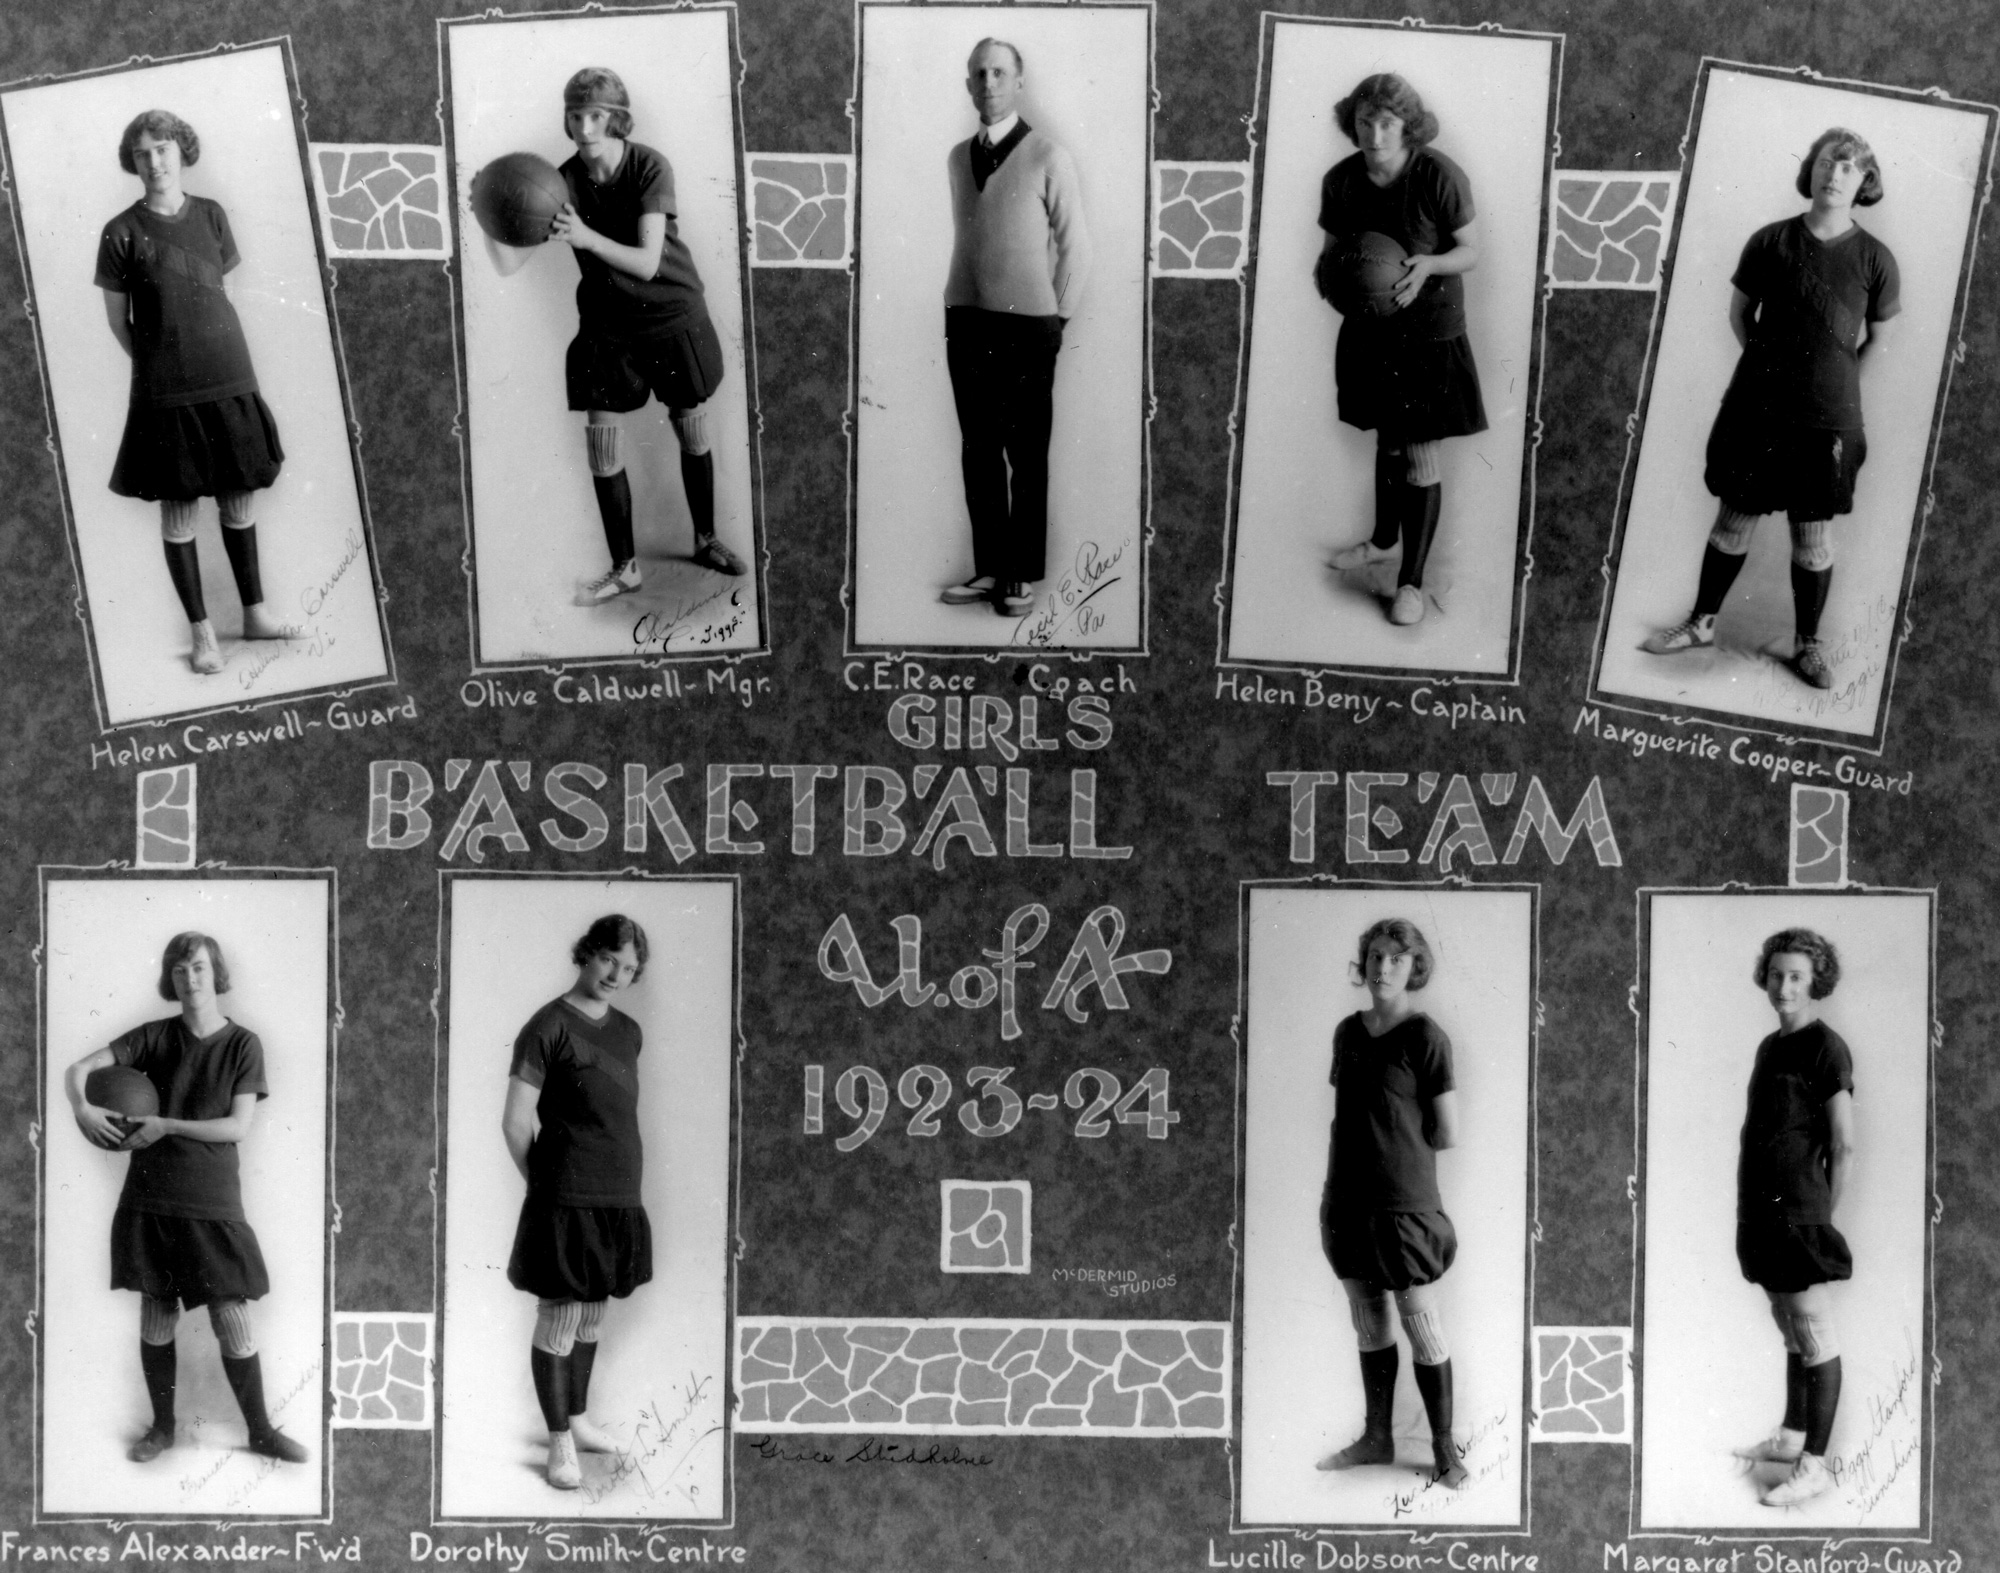 Olive Caldwell, top left, and the 1923-24 women’s Varsity basketball team. Image courtesy of U of A Archives, UAA-1972-056-044.